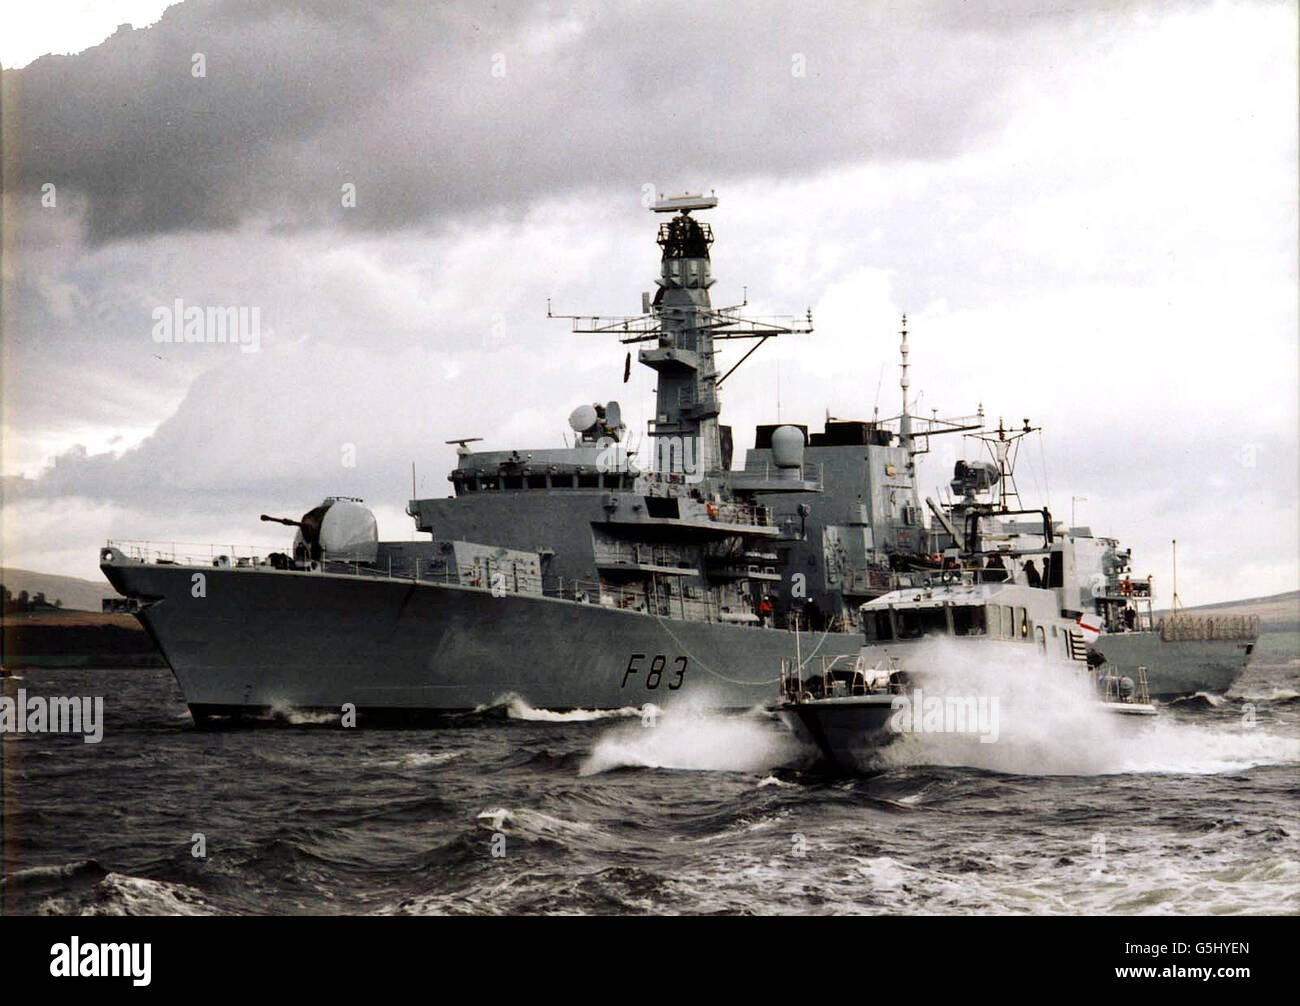 HMS St Albans, the last of 16 Type 23 Duke class anti-submarine warfare frigate sto be built for the Royal Navy, begins her voyage to Portsmouth after leaving BAE Systems marine yard in Scotstoun on the Clyde. * She was escorted on her way by the Glasgow universities Royal Naval Training ship, HMS Smiter. 27/10/02: HMS St Albans, the last of 16 Type 23 Duke class anti-submarine warfare frigates to be built for the Royal Navy, begins her voyage to Portsmouth after leaving BAE Systems marine yard in Scotstoun on the Clyde: The warship was suffered major damage after it was hit by a P&O Stock Photo